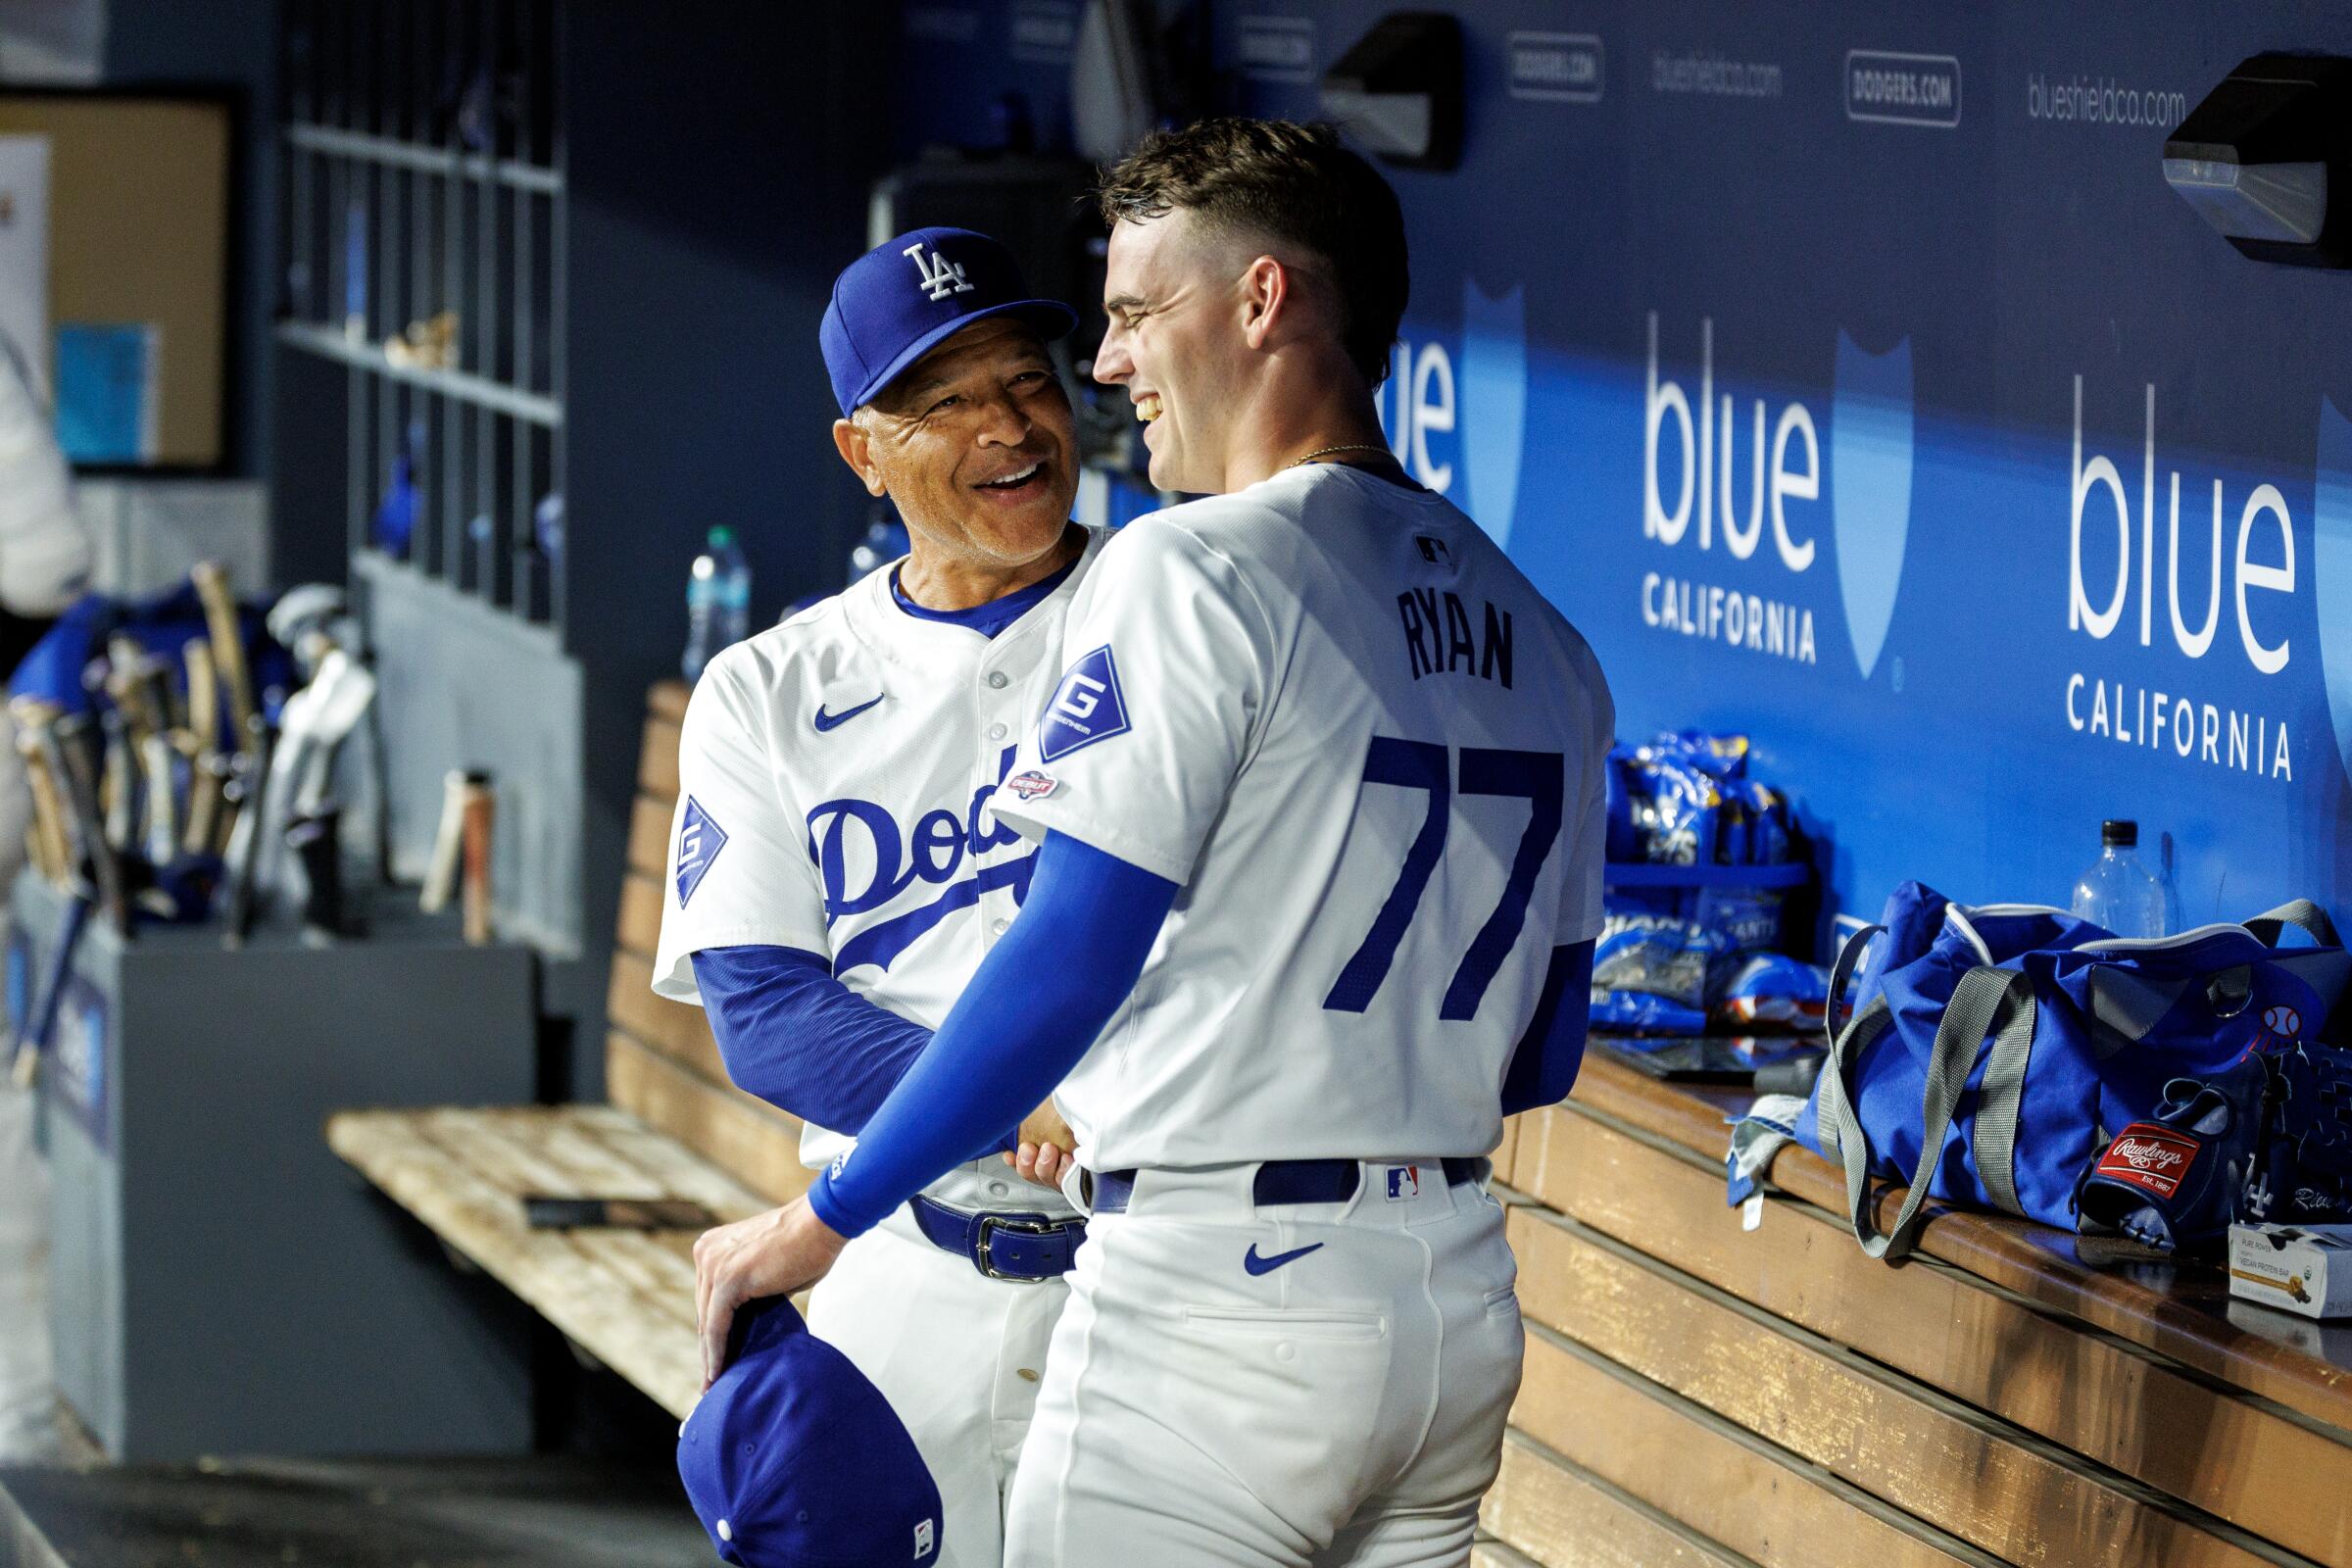 Dodgers manager Dave Roberts congratulates River Ryan after the starting pitcher's MLB debut.